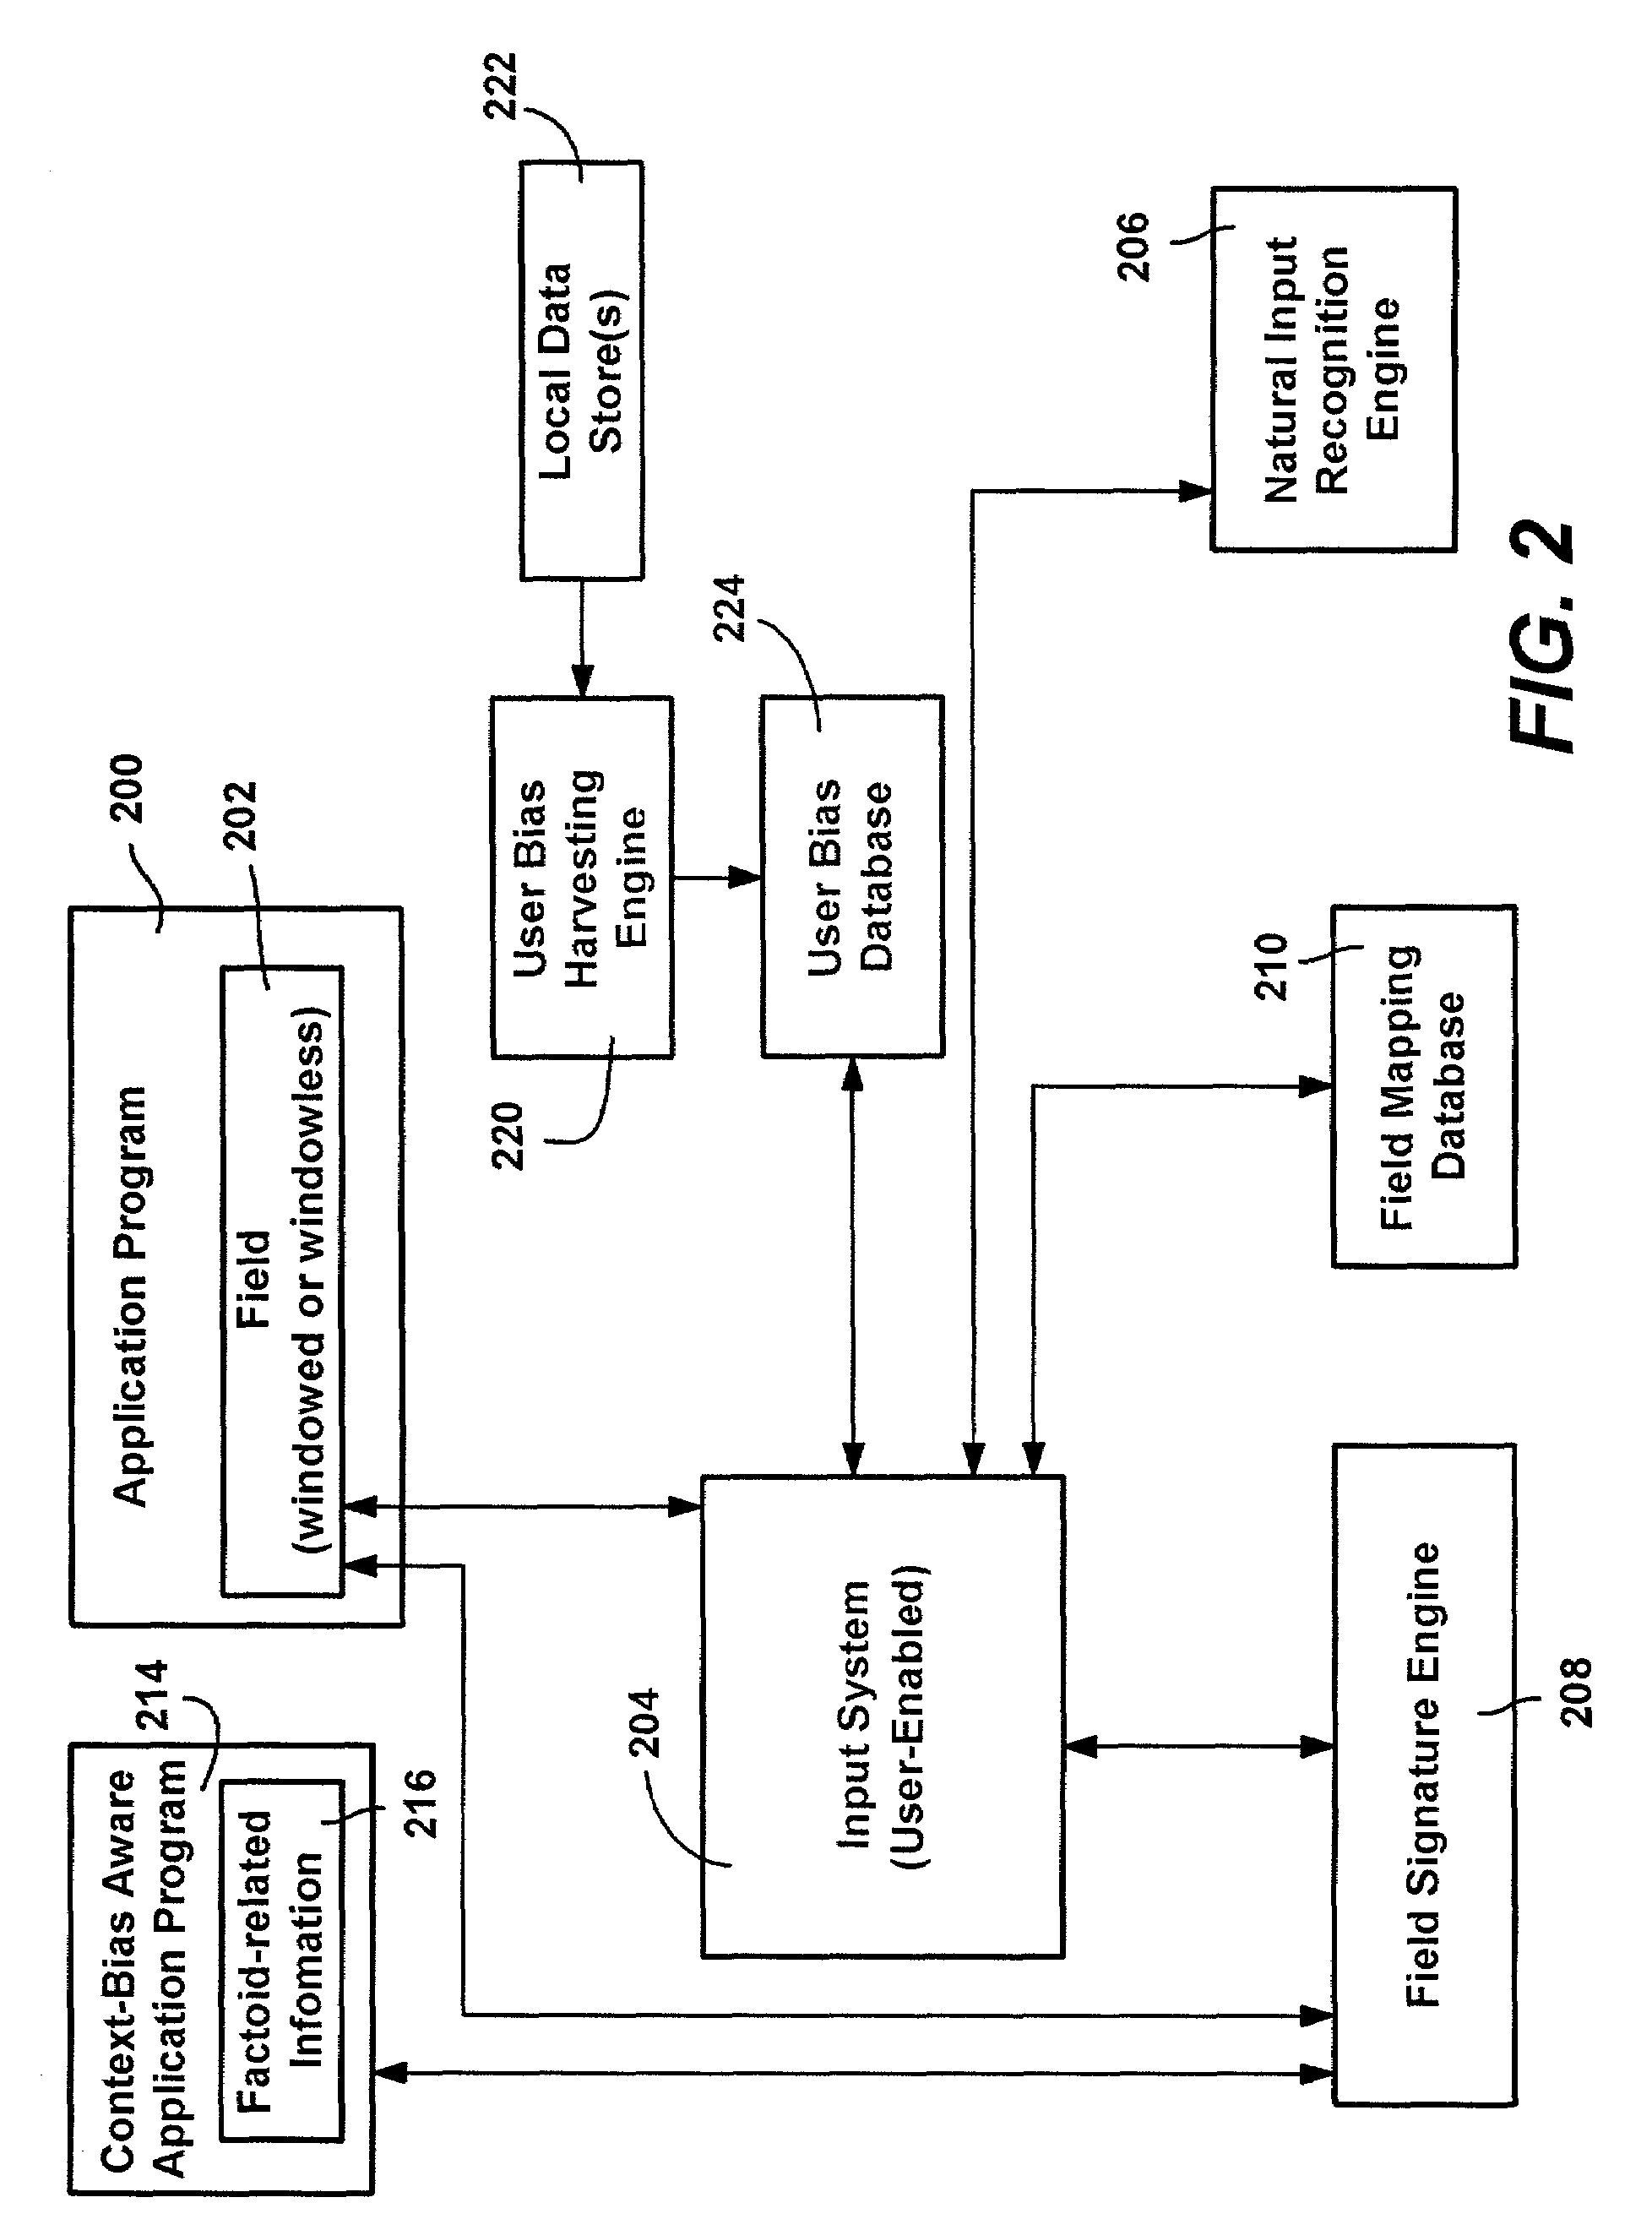 Natural input recognition system and method using a contextual mapping engine and adaptive user bias